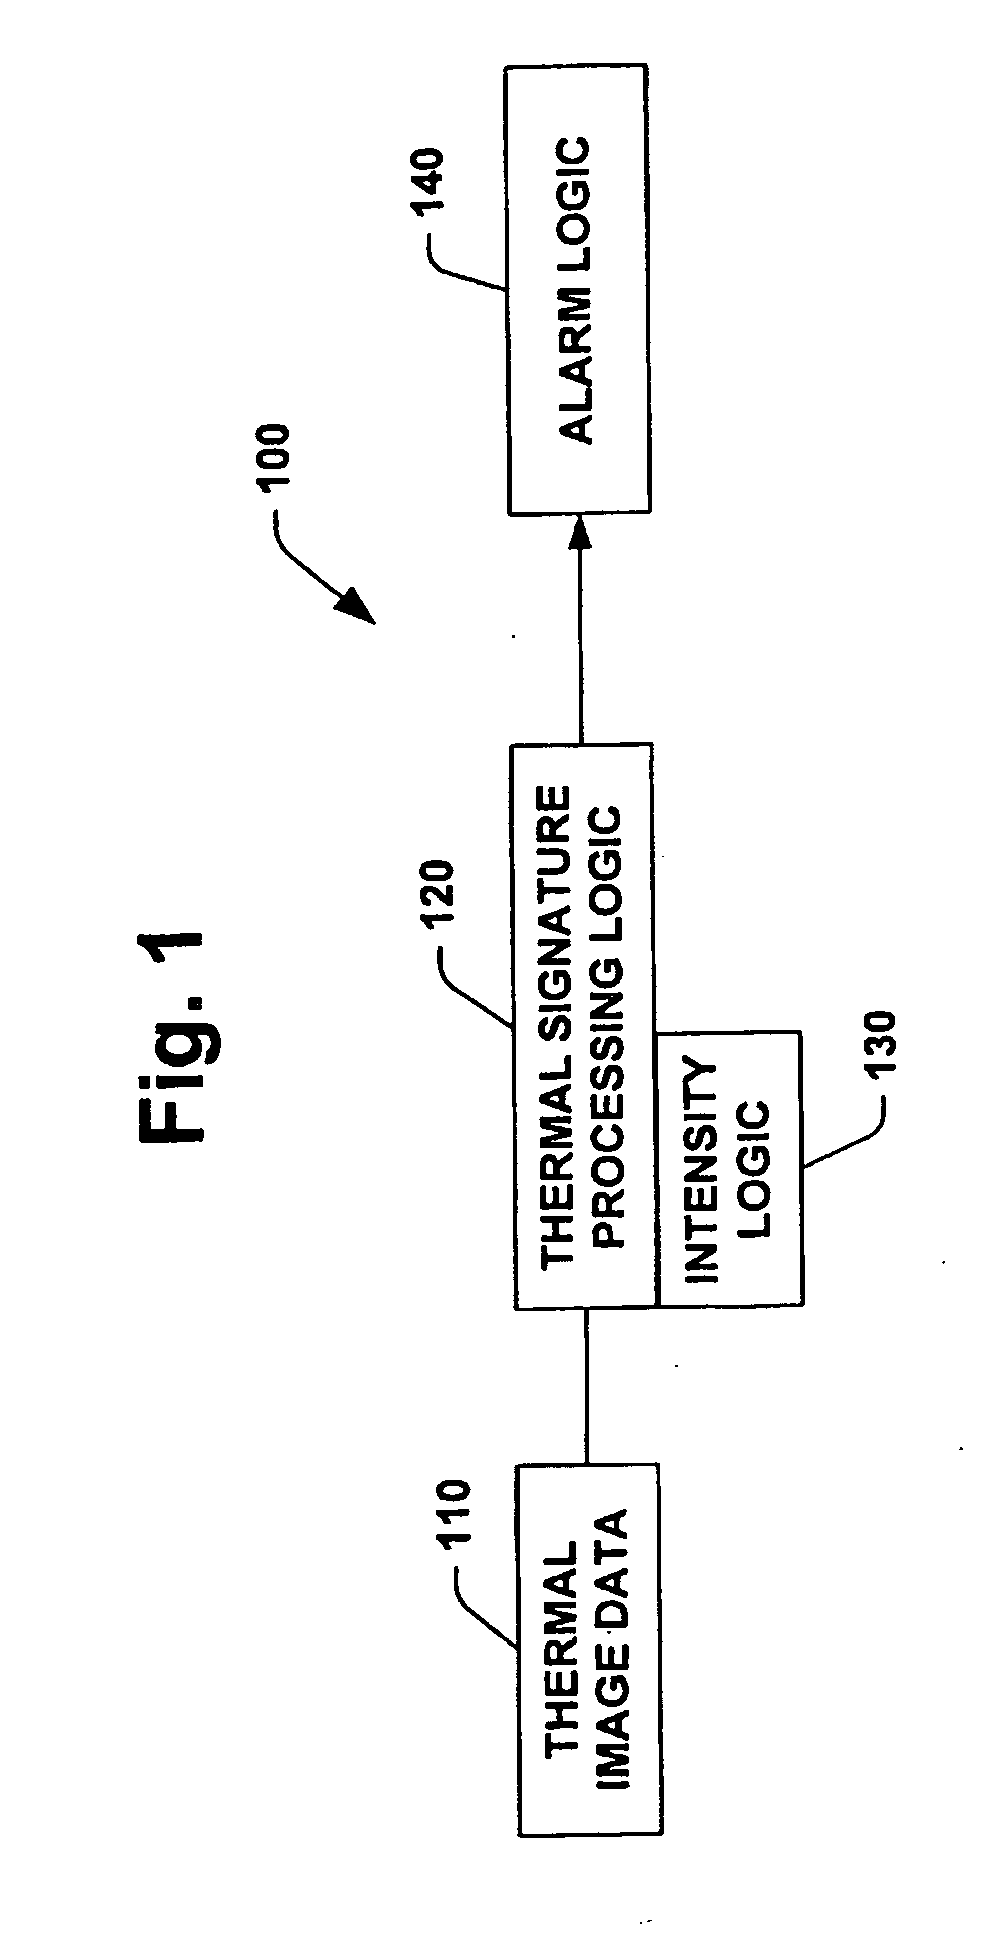 Thermal signature intensity alarmer system and method for processing thermal signature